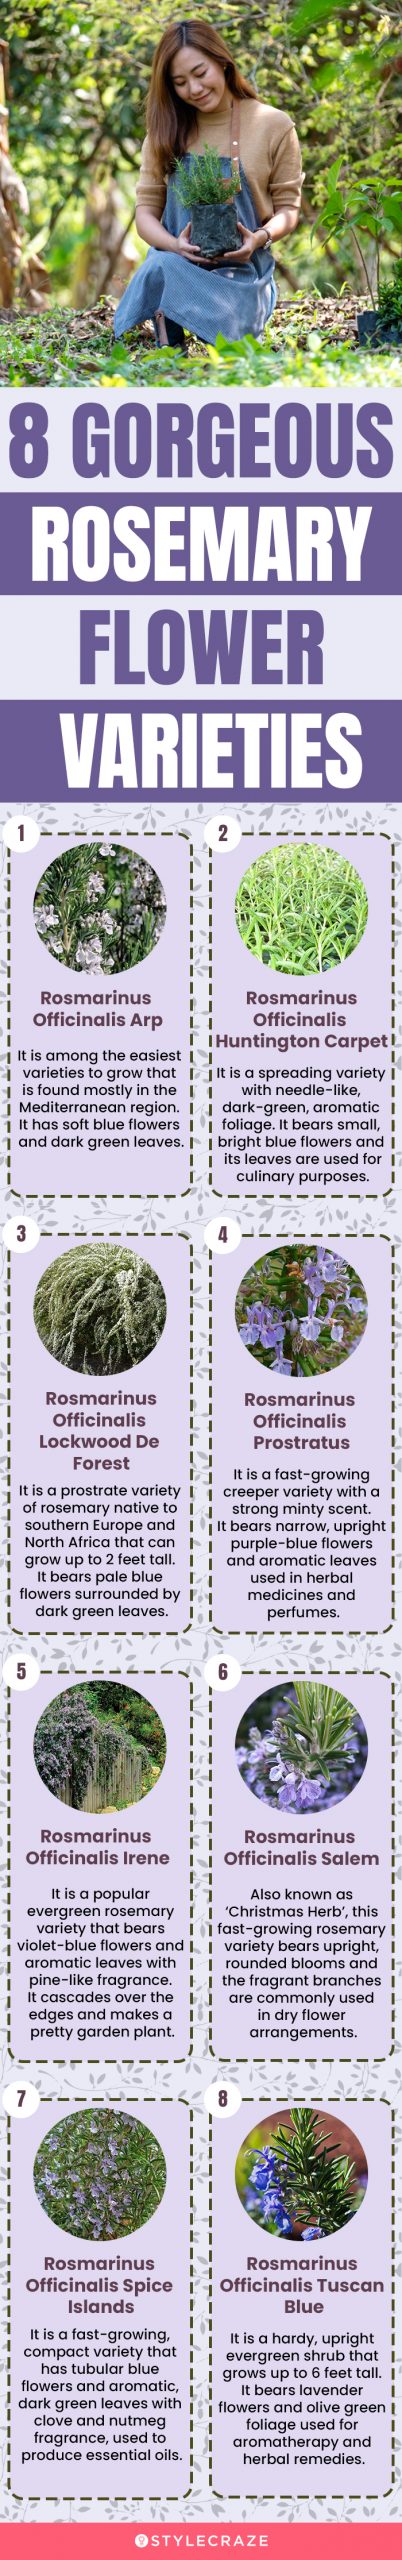 8 gorgeous rosemary flower varieties(infographic)